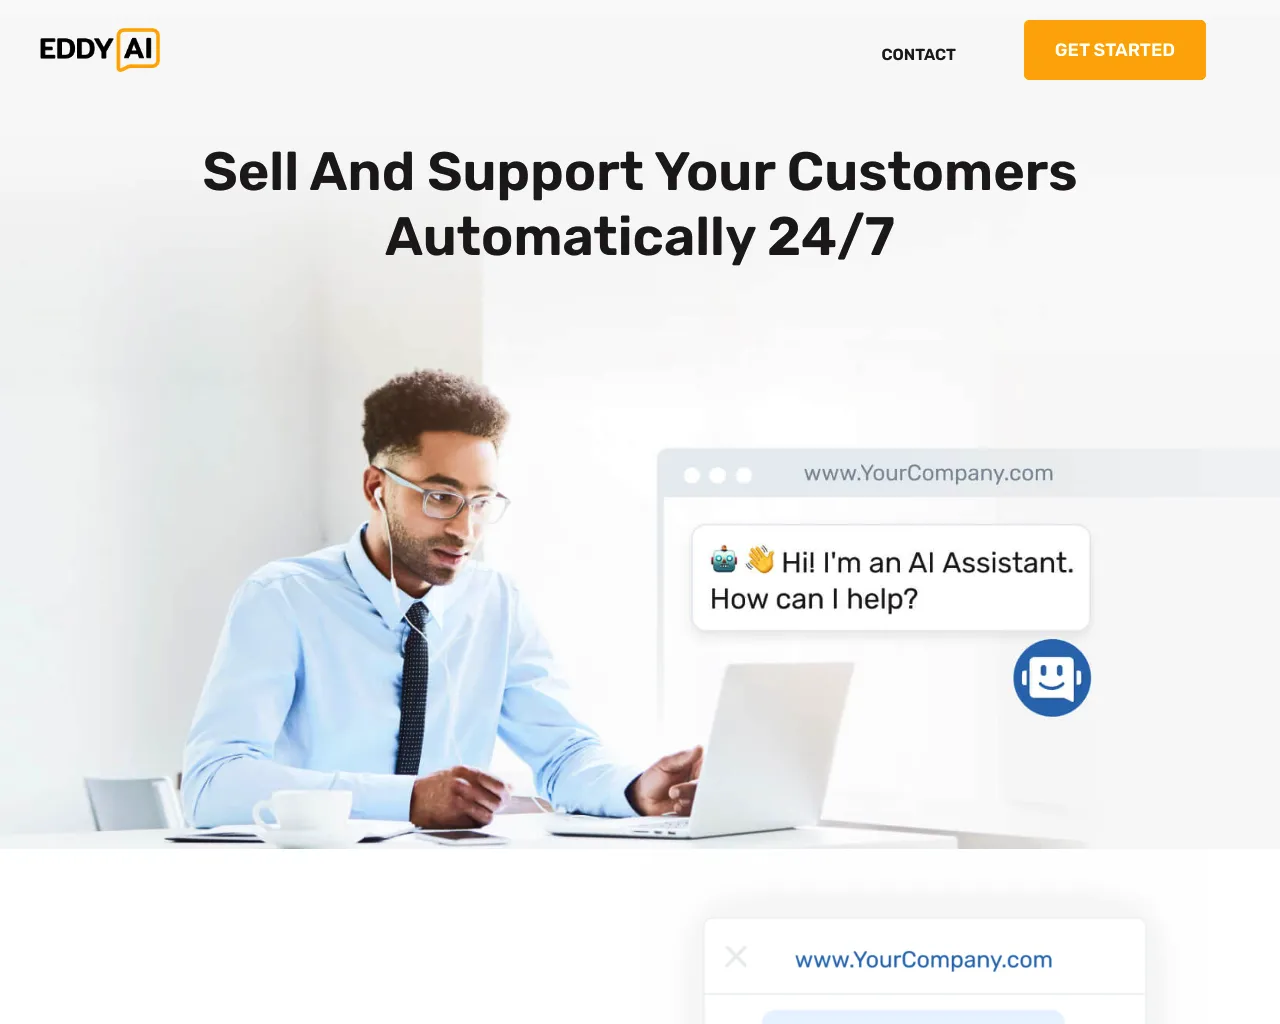 Sell and Support Your Customers Automatically 24/7